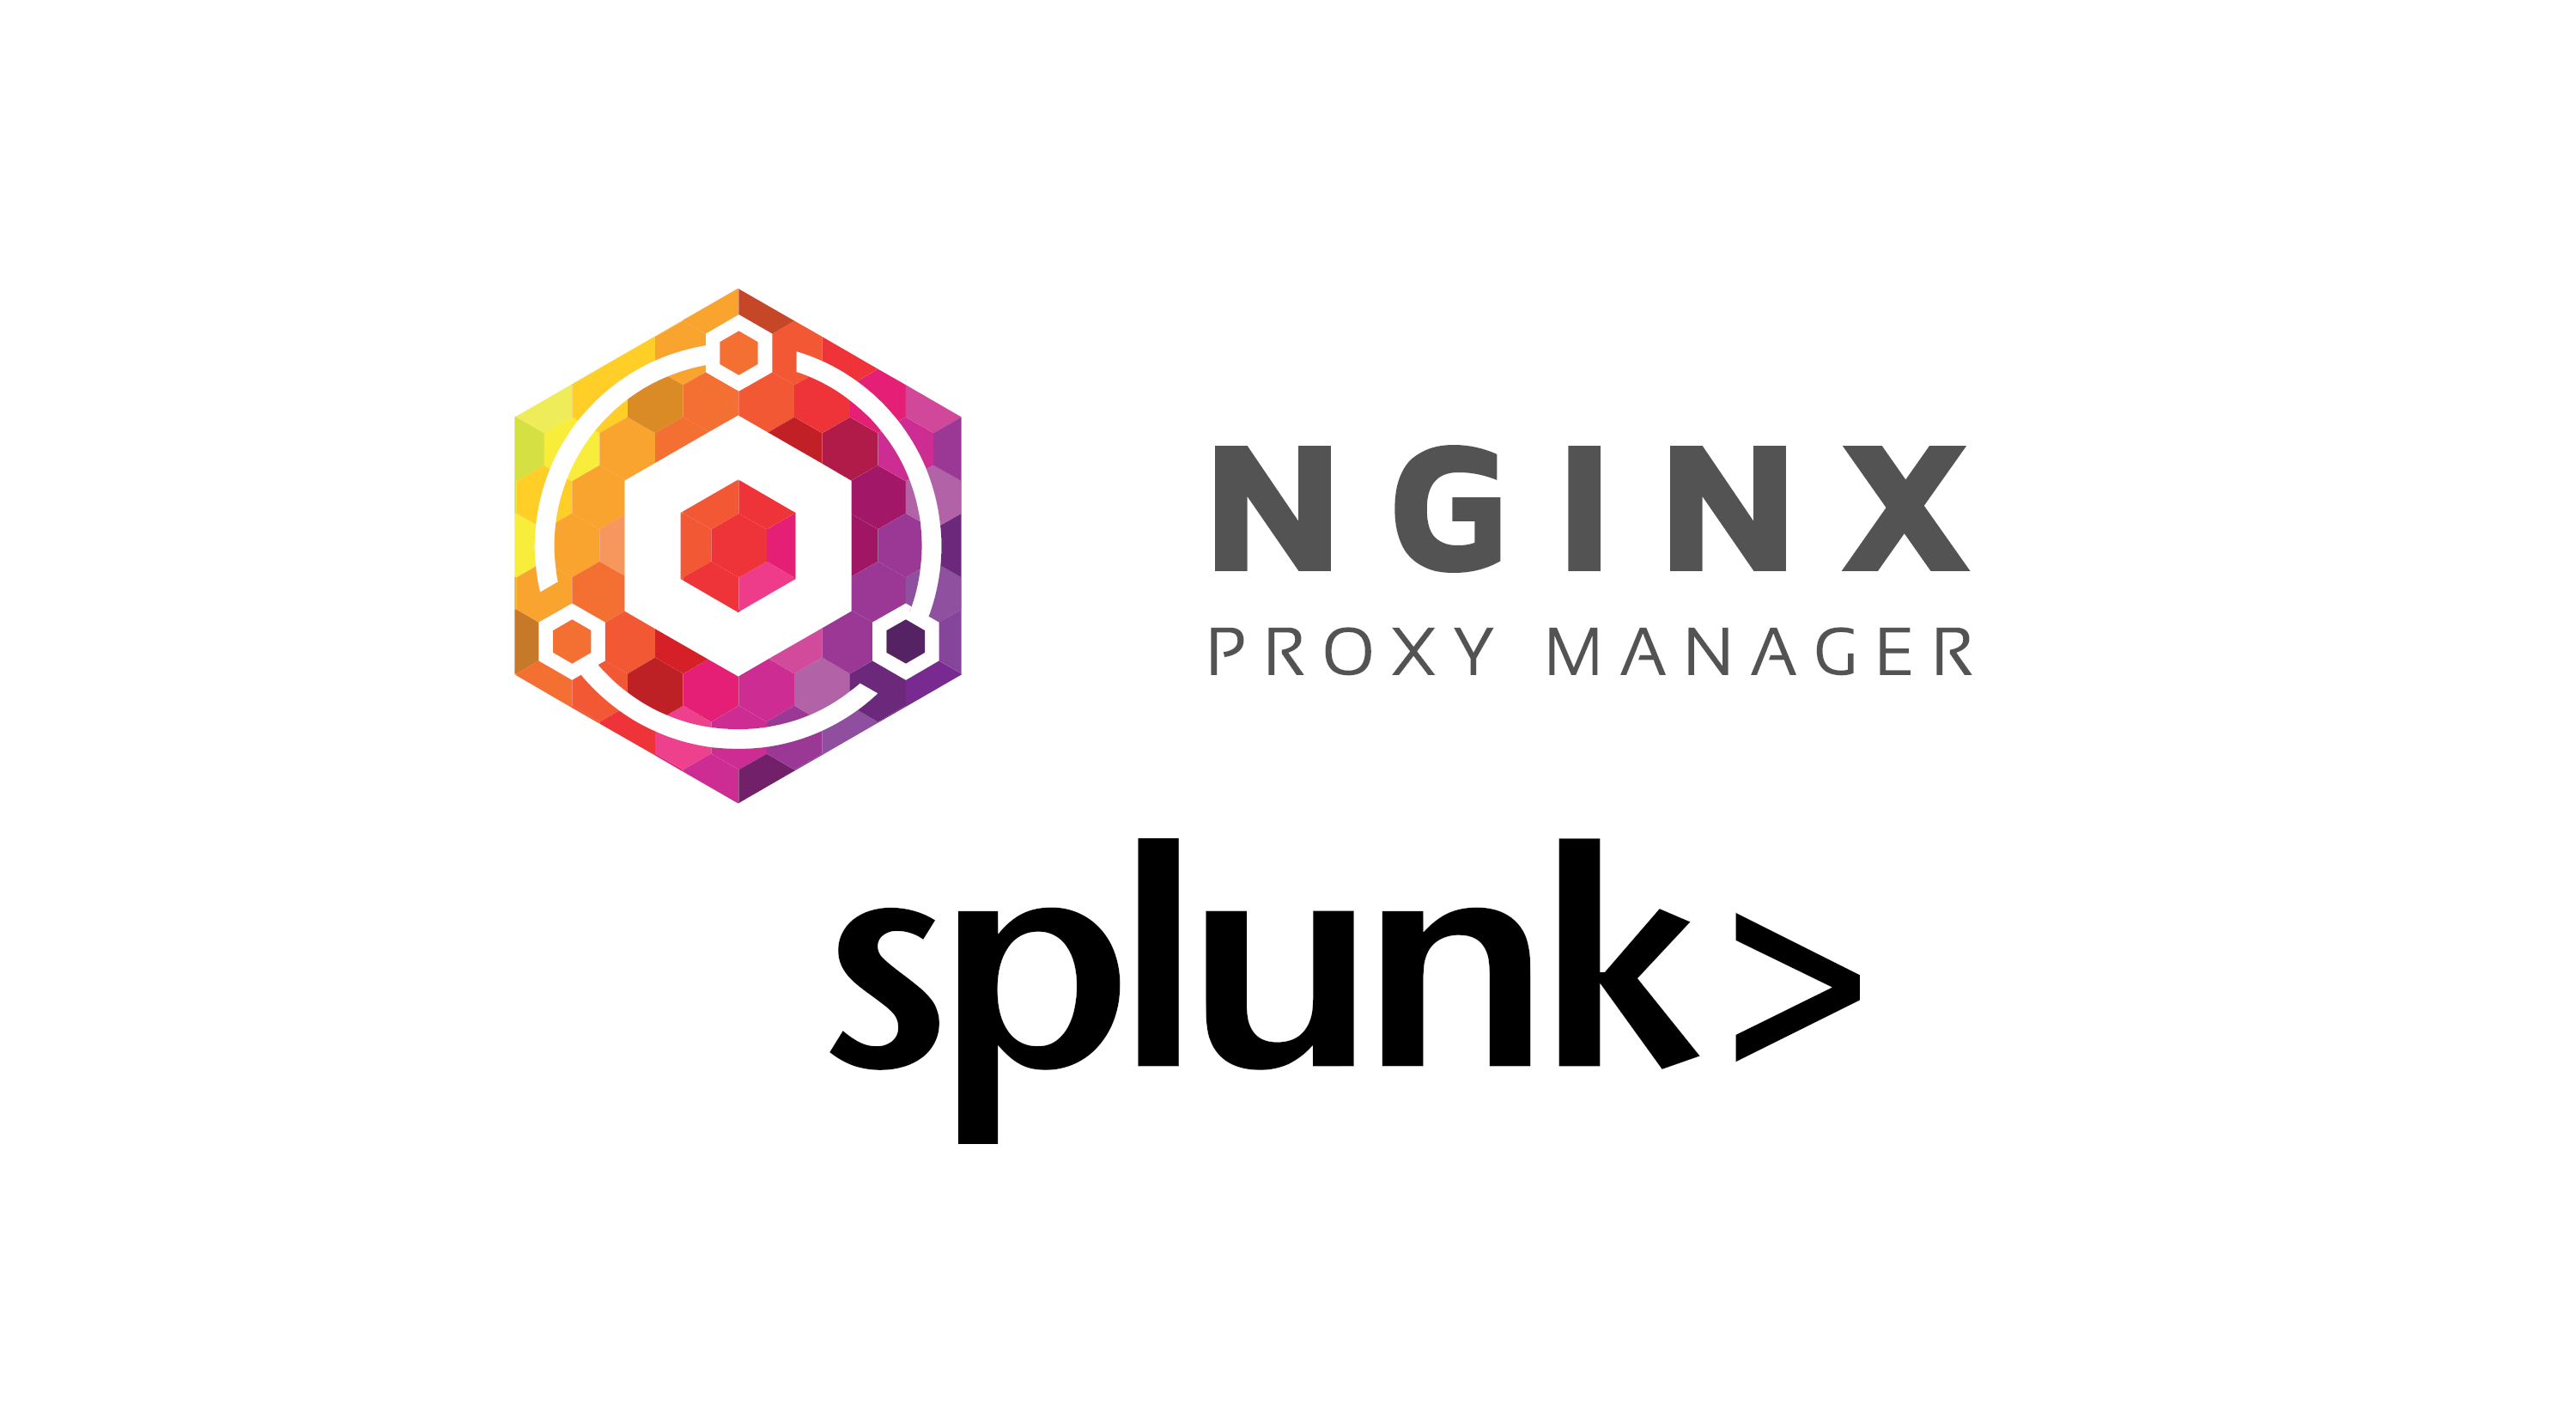 The unofficial guide to getting the Nginx Proxy Manager logs into Splunk.